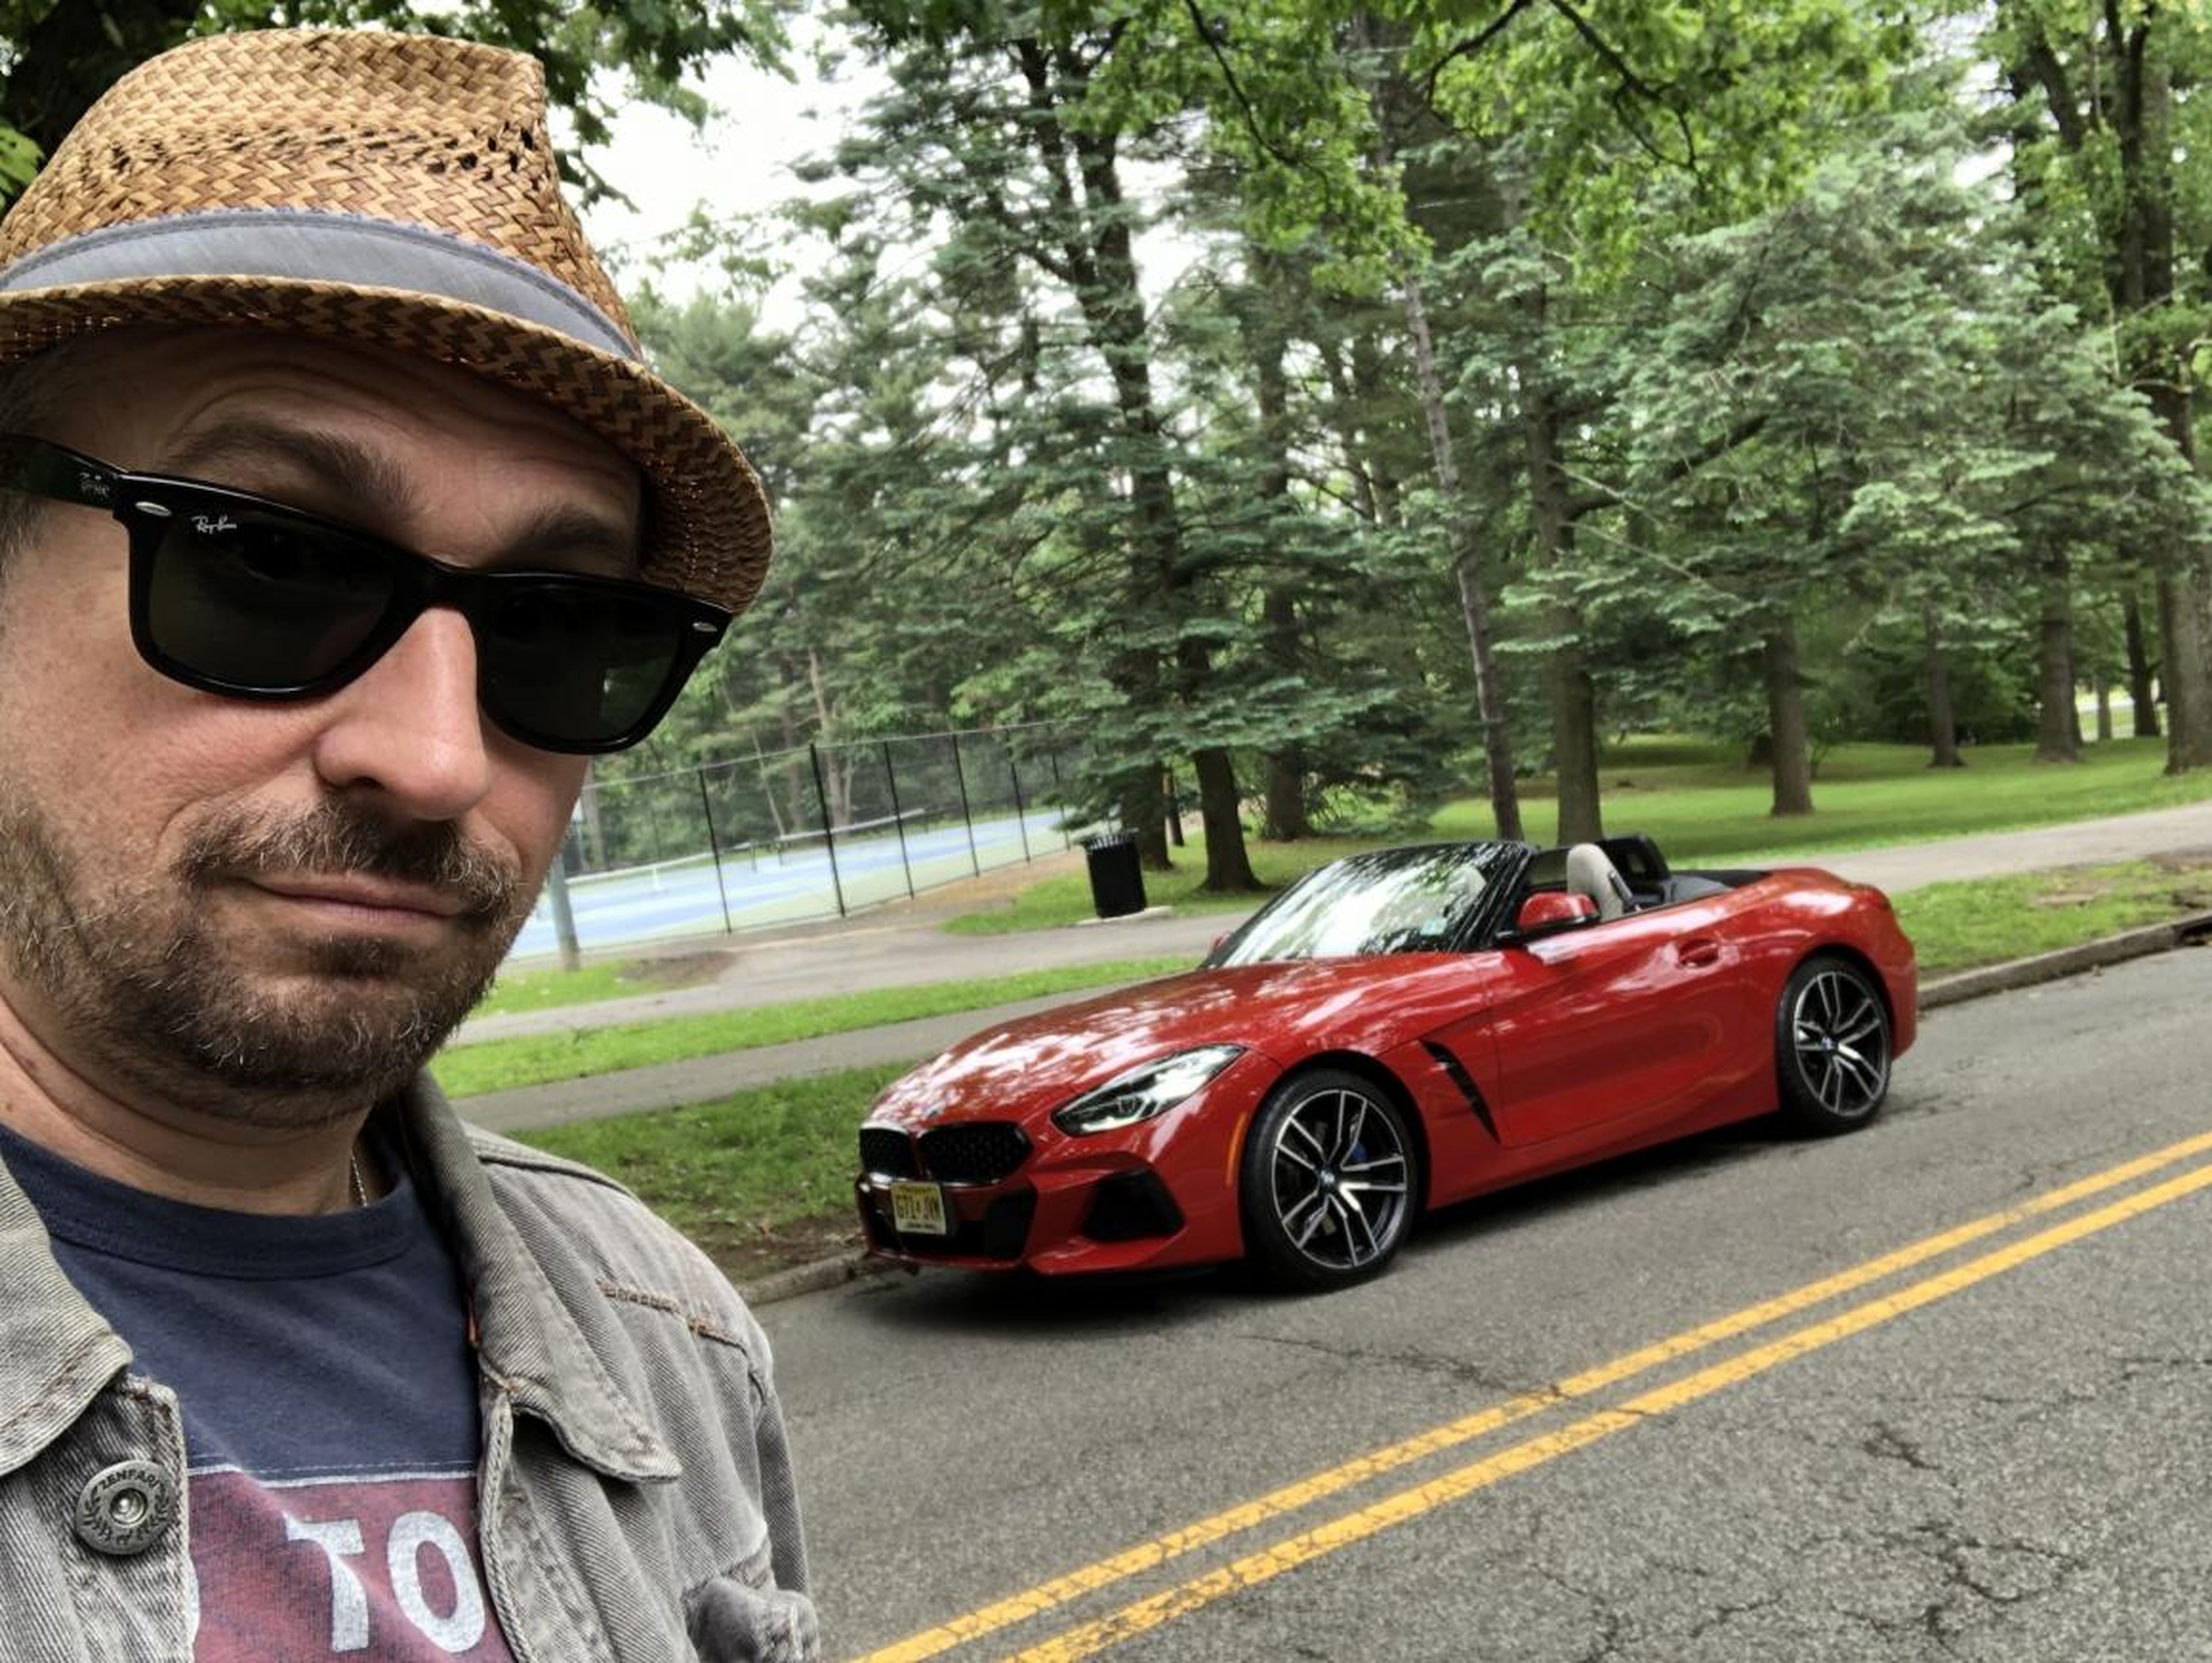 The past spring, I'd sampled a 2019 BMW Z4 sDrive30i, a roadster version of the Supra coupé, built on the same assembly line as the Toyota.